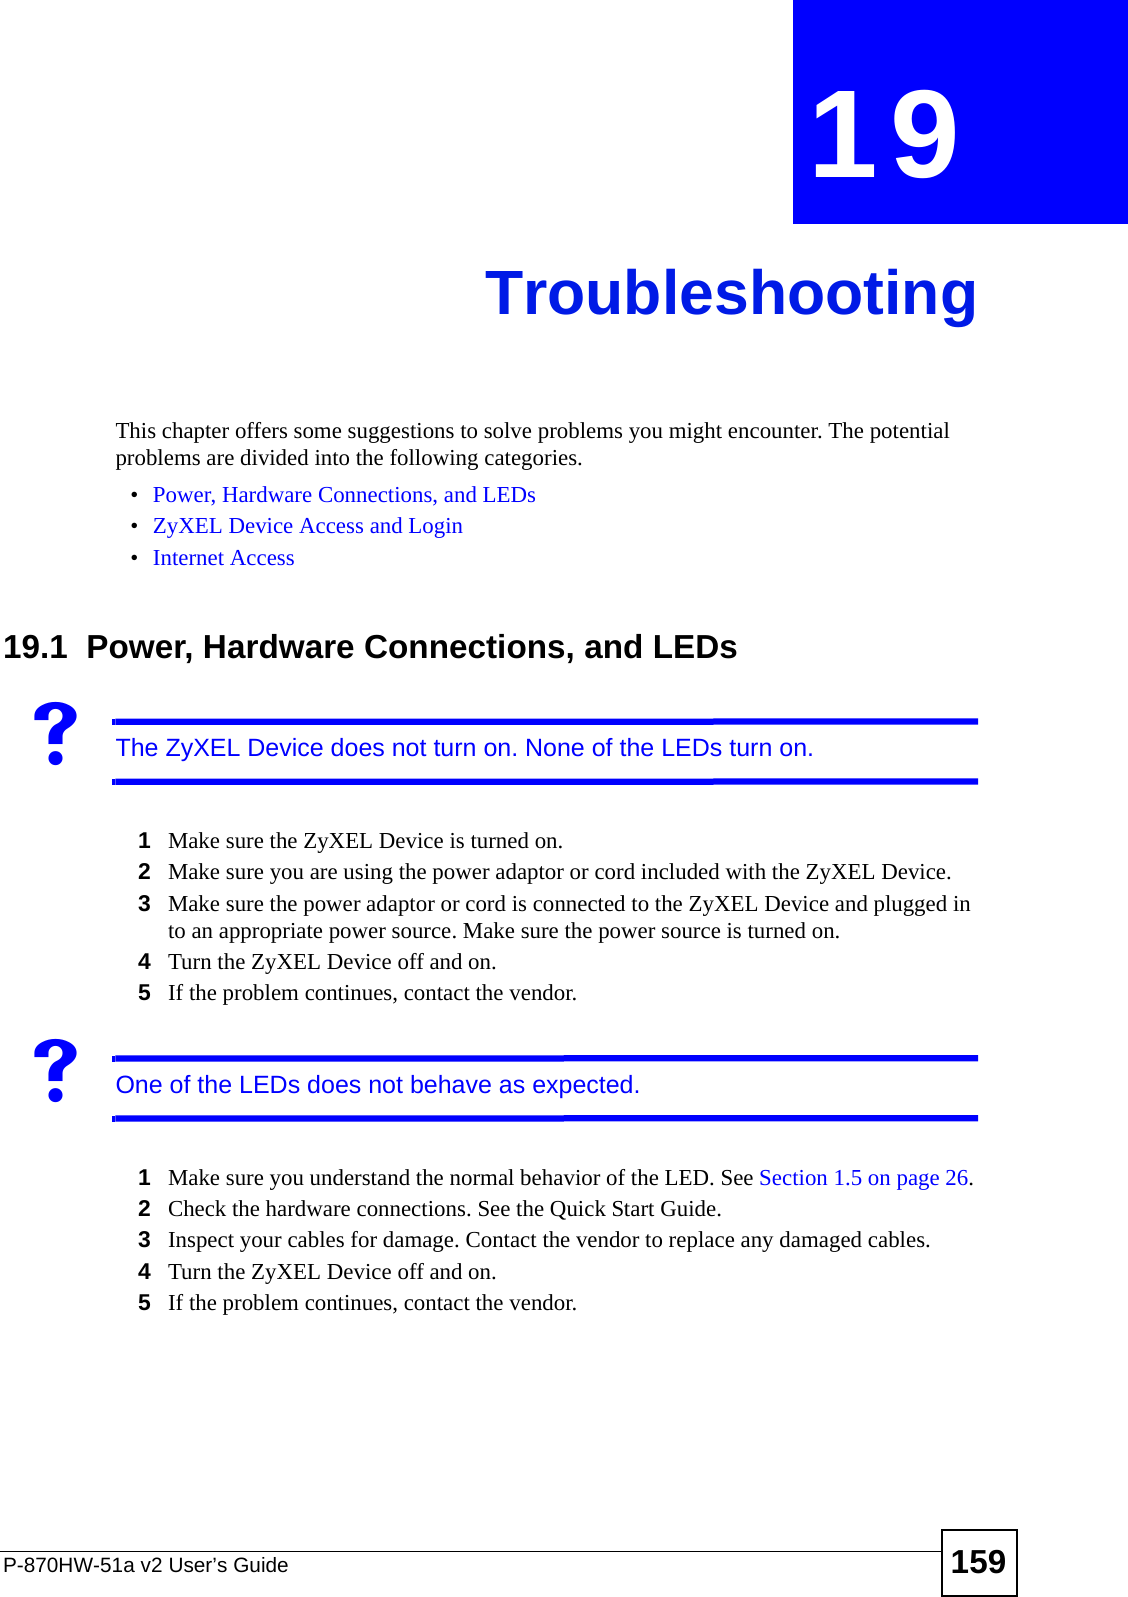 P-870HW-51a v2 User’s Guide 159CHAPTER  19 TroubleshootingThis chapter offers some suggestions to solve problems you might encounter. The potential problems are divided into the following categories. •Power, Hardware Connections, and LEDs•ZyXEL Device Access and Login•Internet Access19.1  Power, Hardware Connections, and LEDsVThe ZyXEL Device does not turn on. None of the LEDs turn on.1Make sure the ZyXEL Device is turned on. 2Make sure you are using the power adaptor or cord included with the ZyXEL Device.3Make sure the power adaptor or cord is connected to the ZyXEL Device and plugged in to an appropriate power source. Make sure the power source is turned on.4Turn the ZyXEL Device off and on. 5If the problem continues, contact the vendor.VOne of the LEDs does not behave as expected.1Make sure you understand the normal behavior of the LED. See Section 1.5 on page 26.2Check the hardware connections. See the Quick Start Guide. 3Inspect your cables for damage. Contact the vendor to replace any damaged cables.4Turn the ZyXEL Device off and on. 5If the problem continues, contact the vendor.